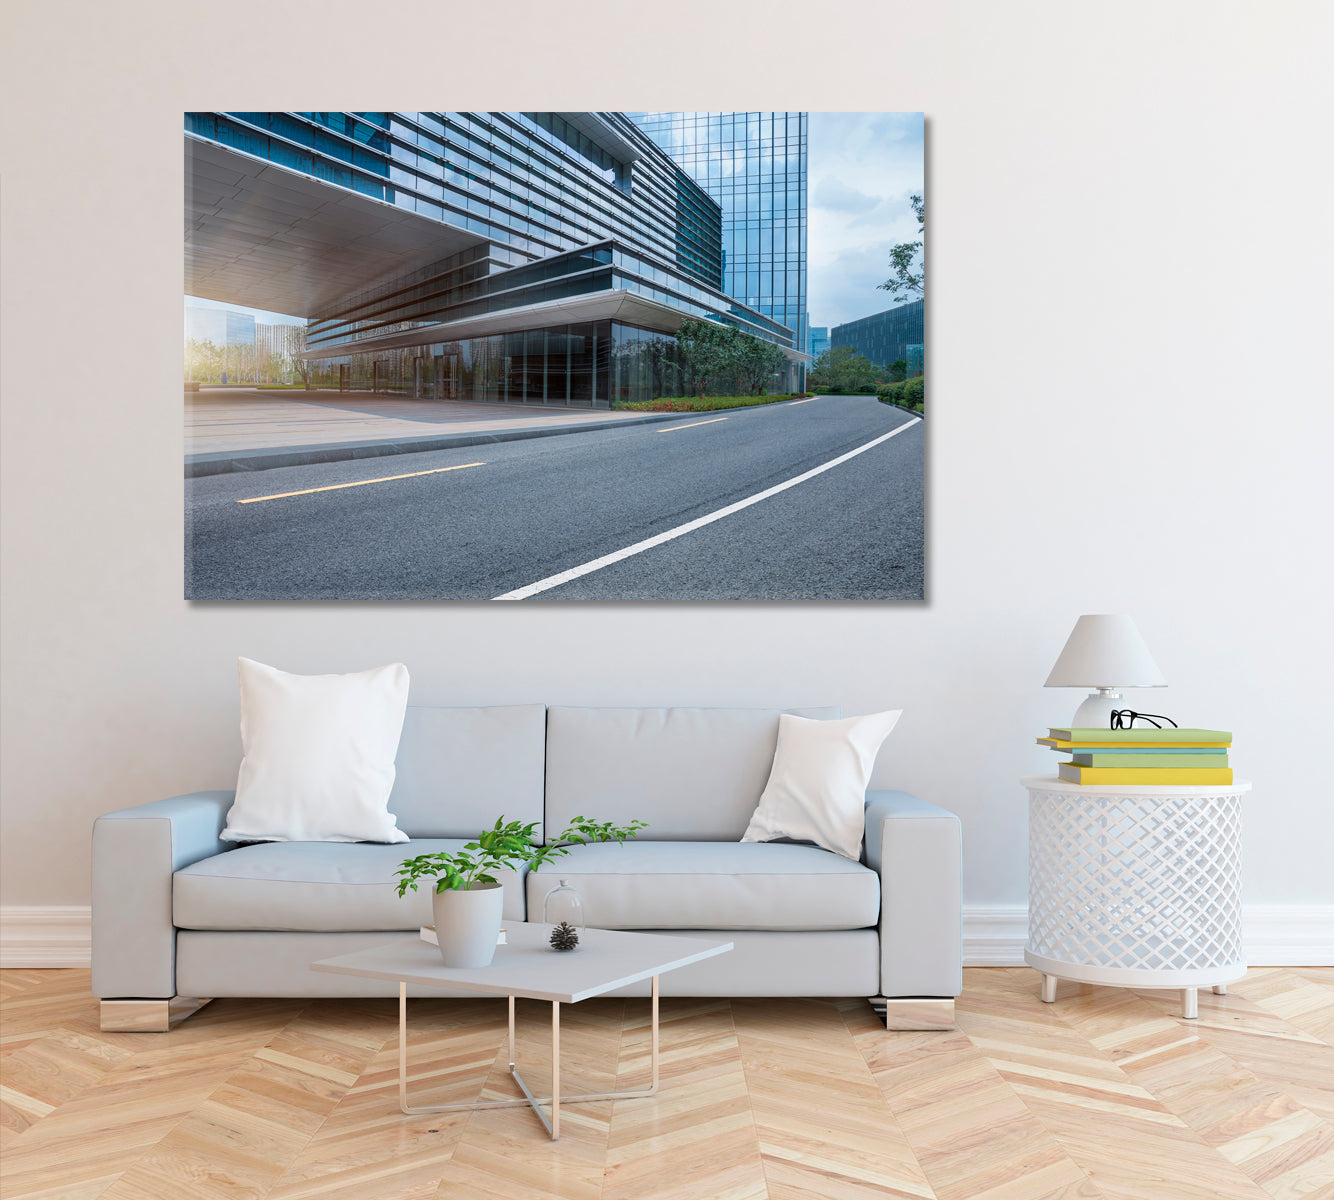 Empty Road and Office Building in Shanghai Canvas Print ArtLexy 1 Panel 24"x16" inches 